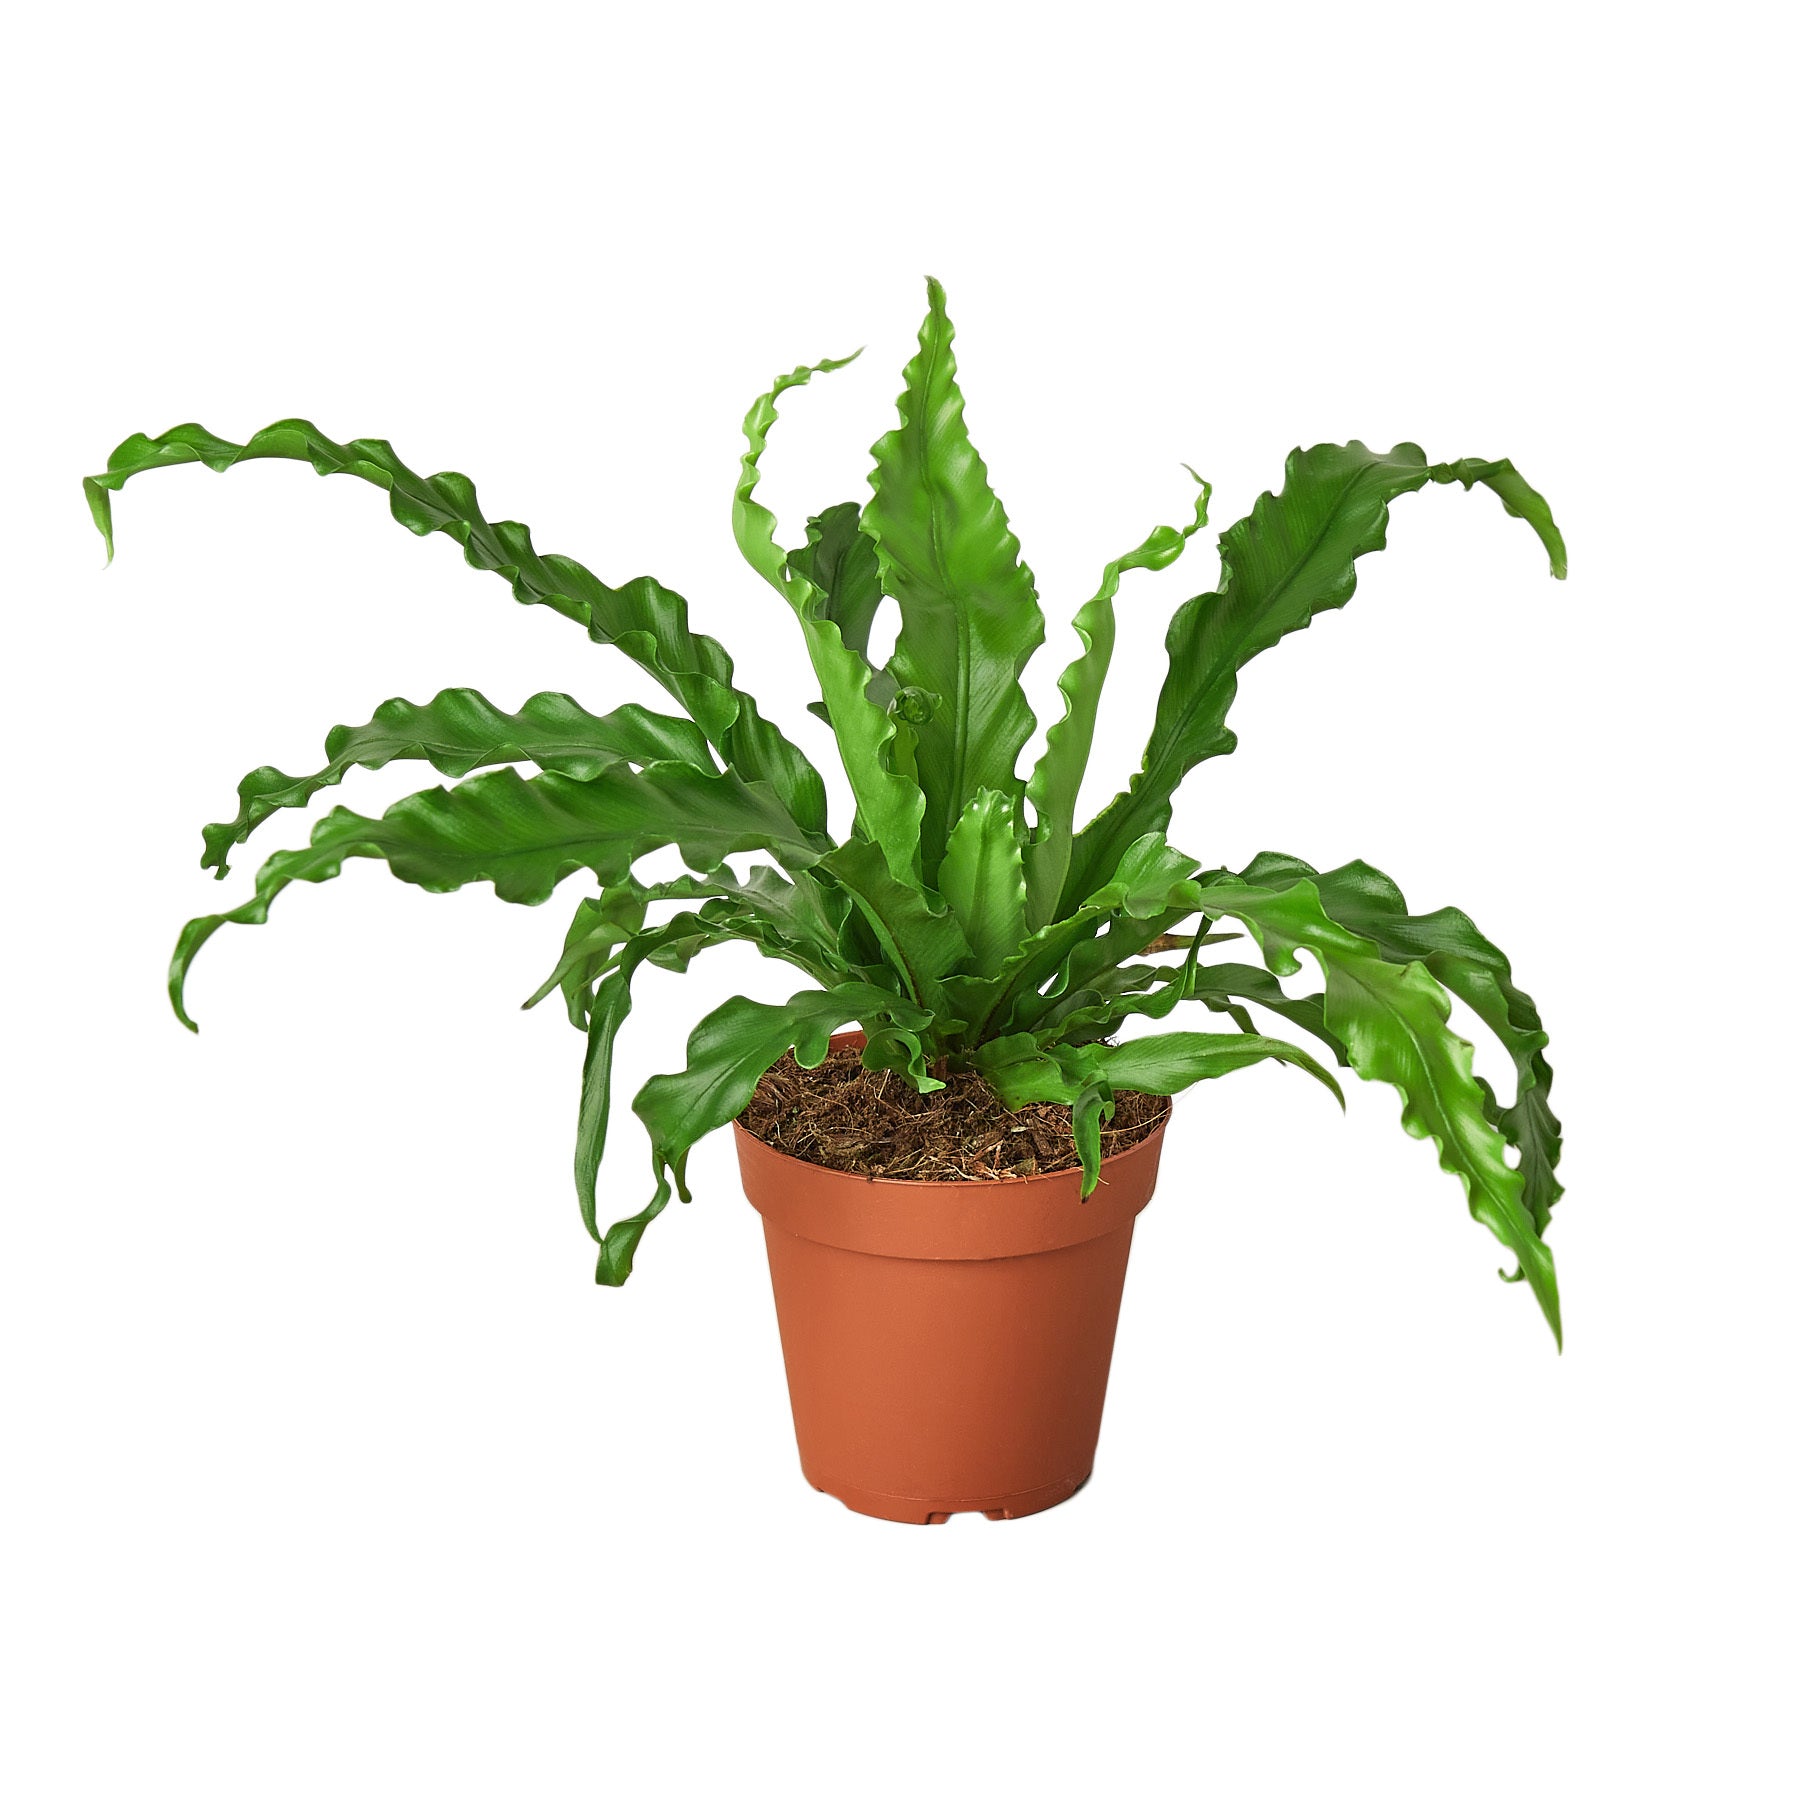 A top-rated plant in a pot on a white background.